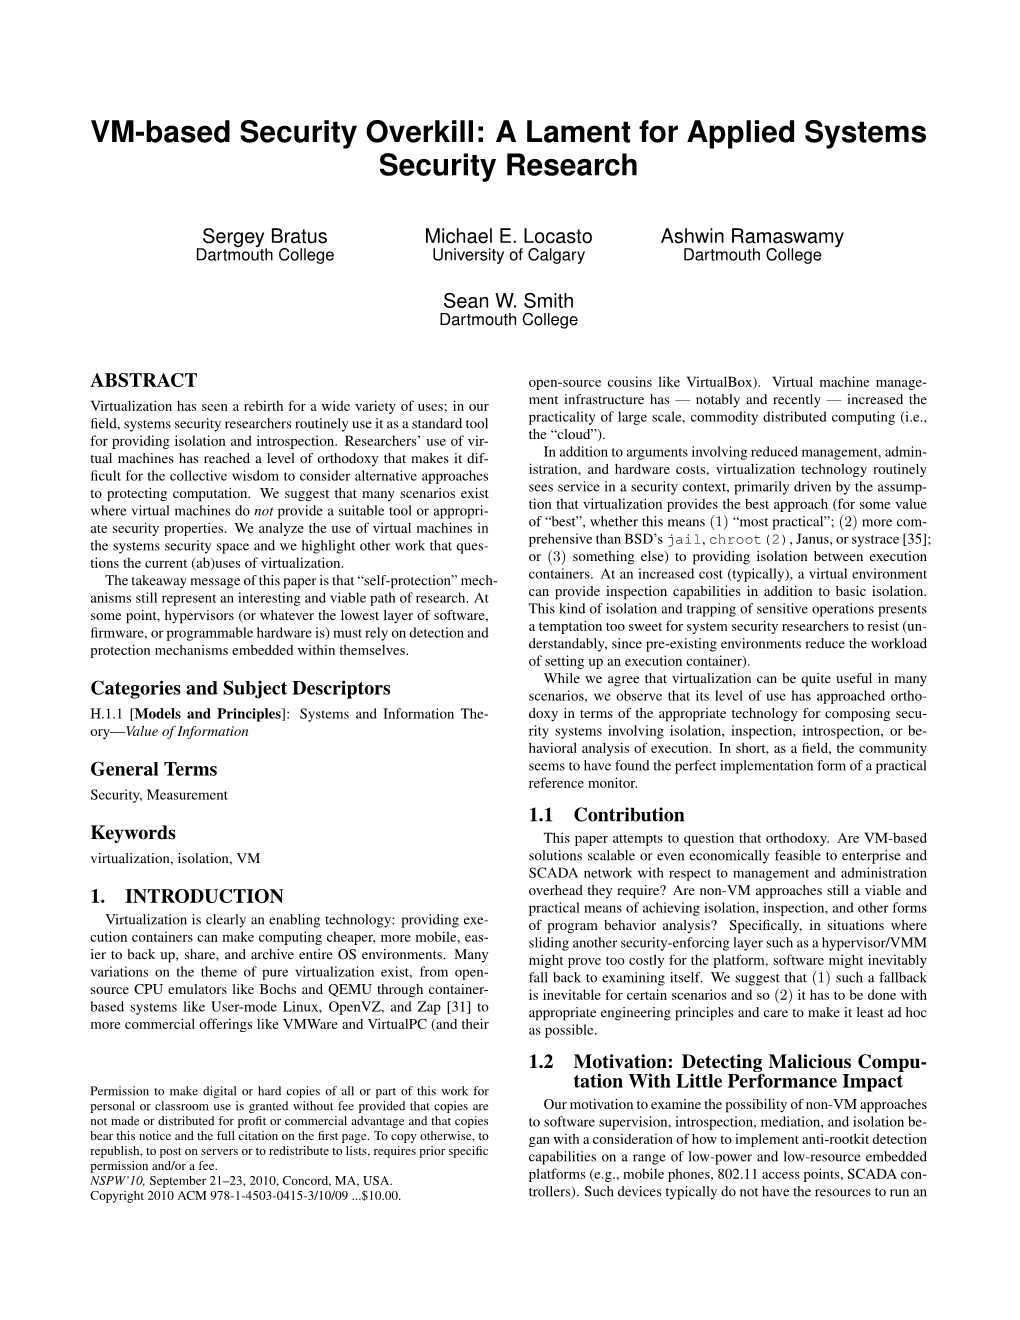 VM-Based Security Overkill: a Lament for Applied Systems Security Research